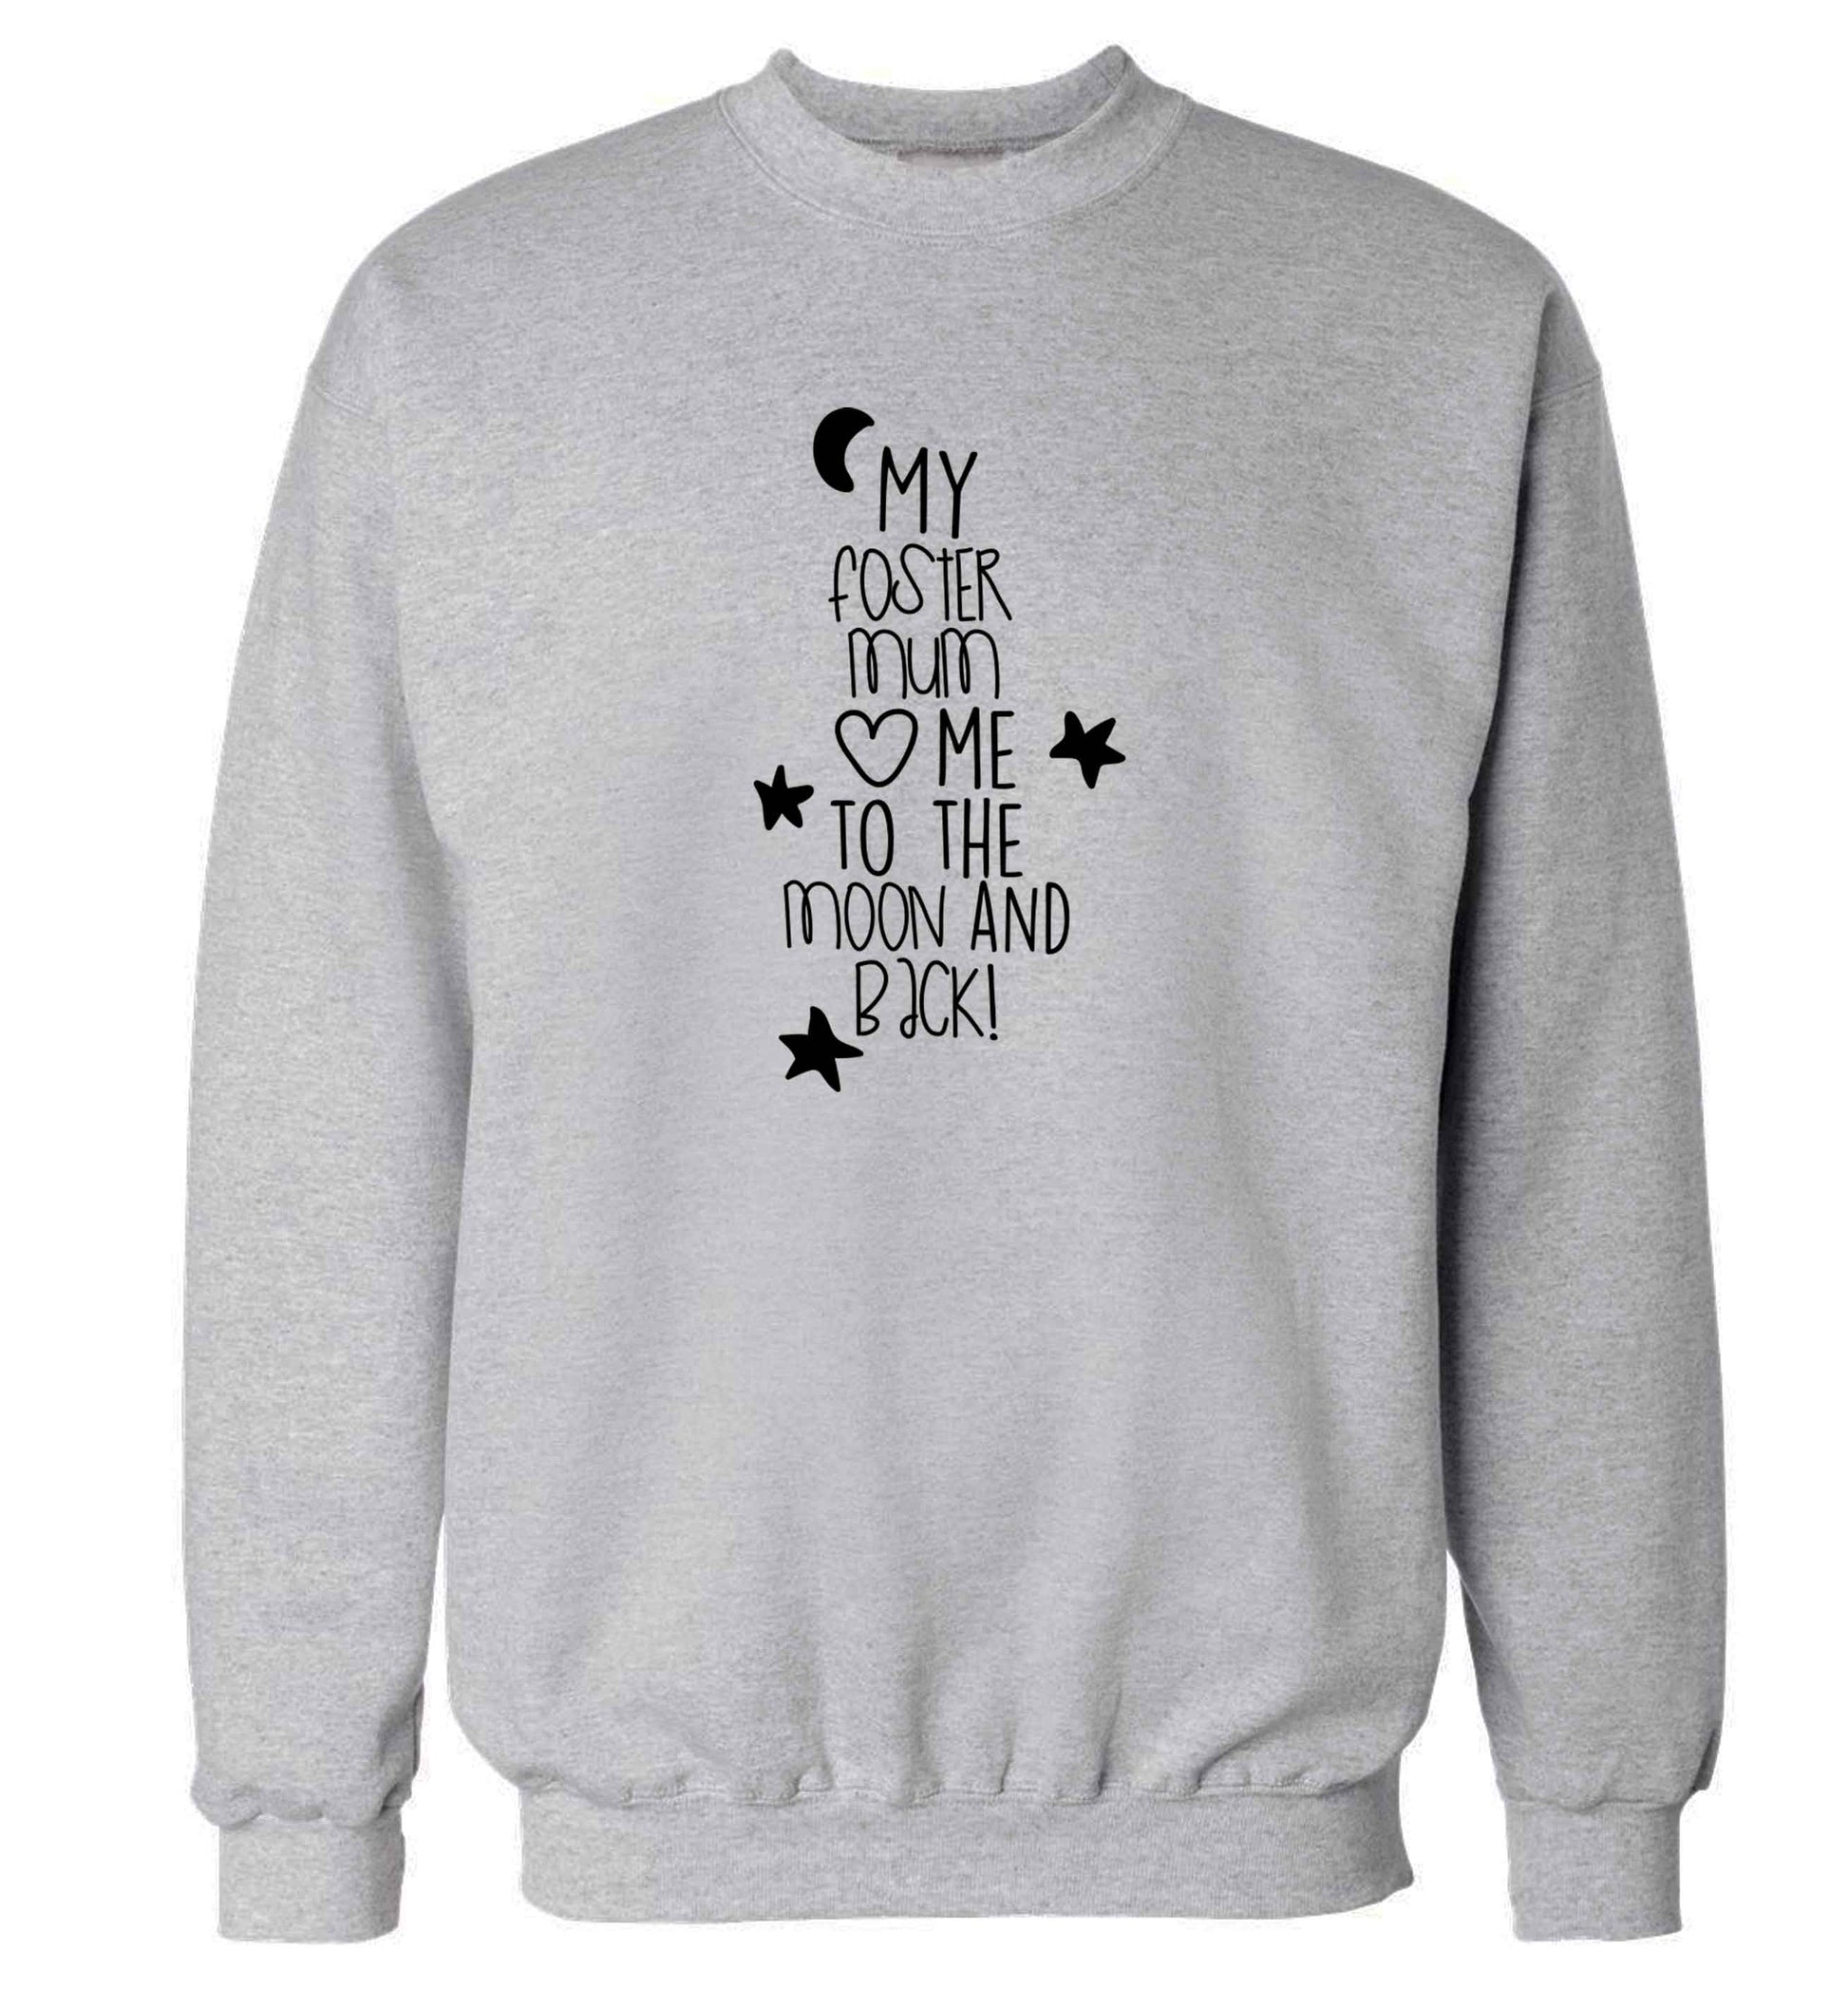 My foster mum loves me to the moon and back adult's unisex grey sweater 2XL